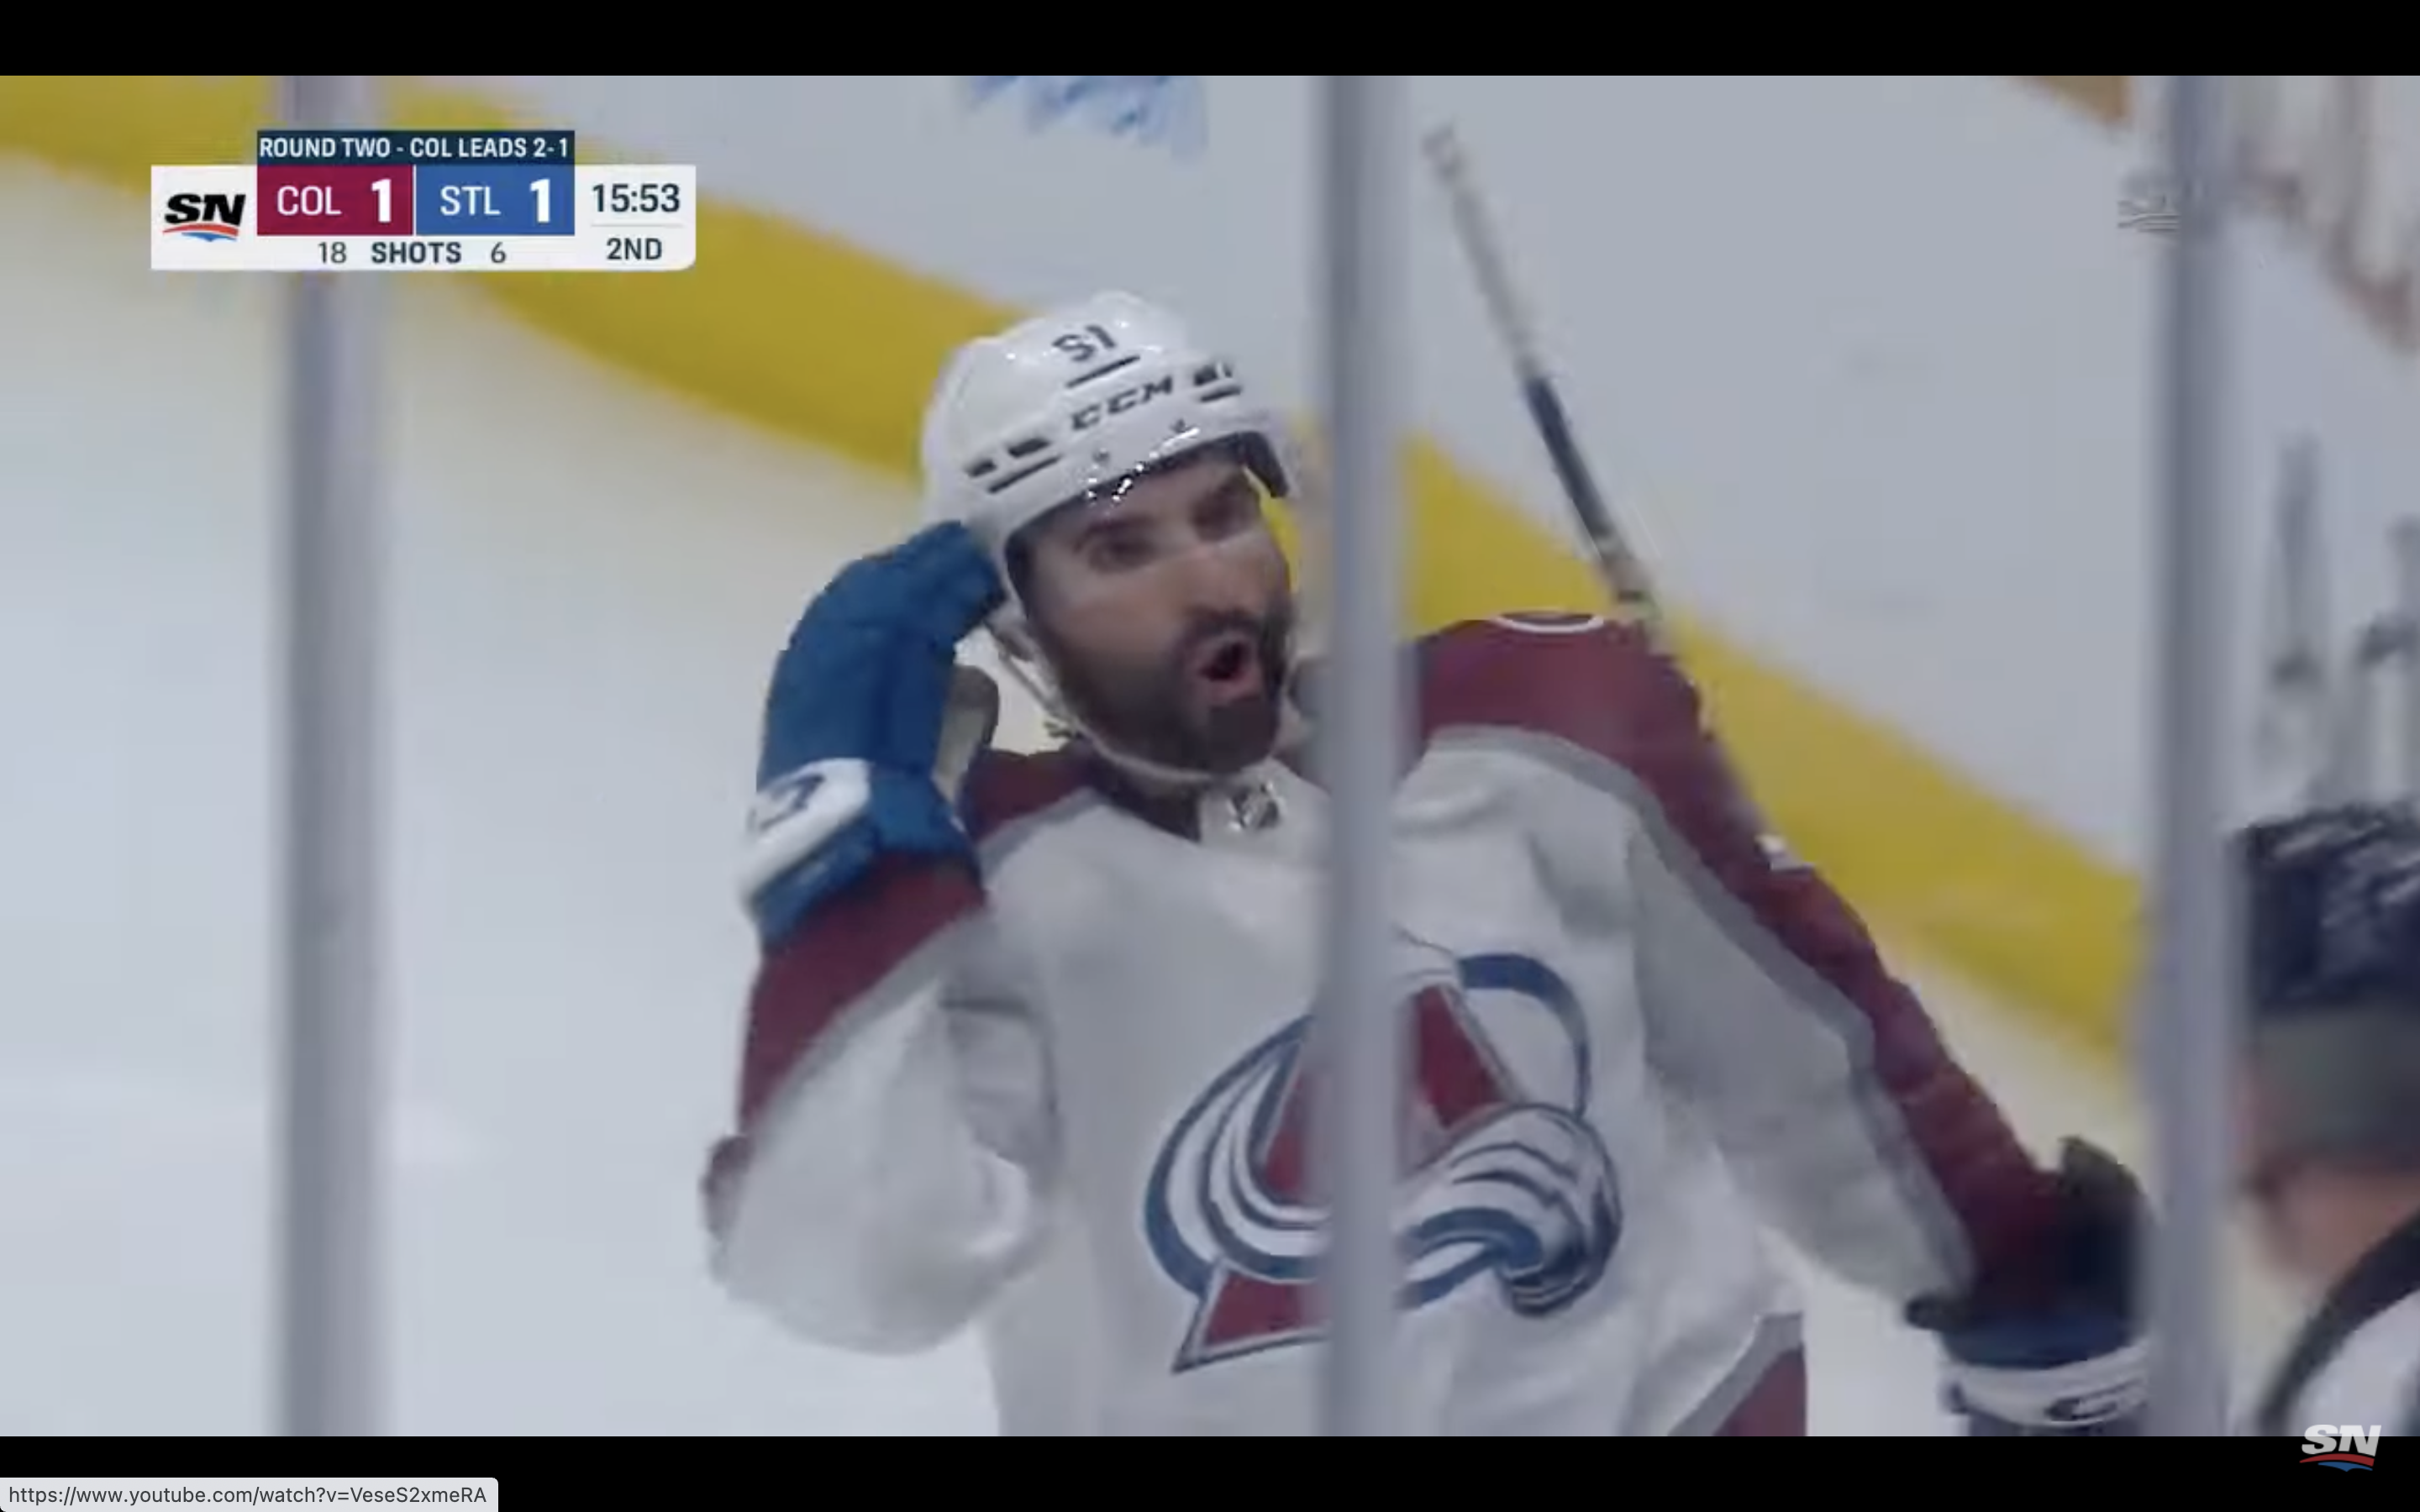 Stanley Cup playoffs: Kadri hat trick leads Avalanche past Blues in